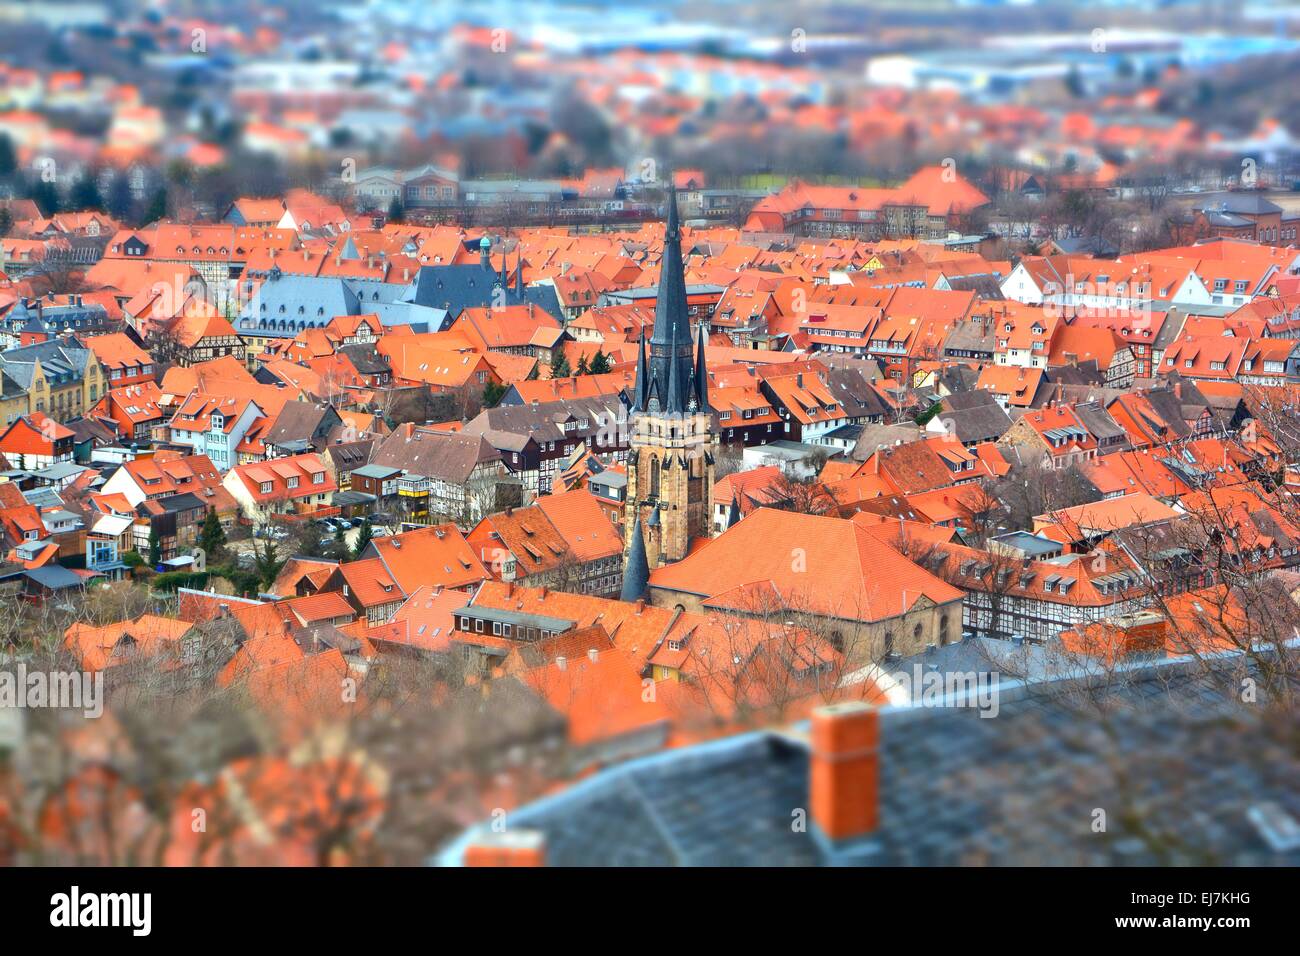 Small town from a bird's perspective Stock Photo